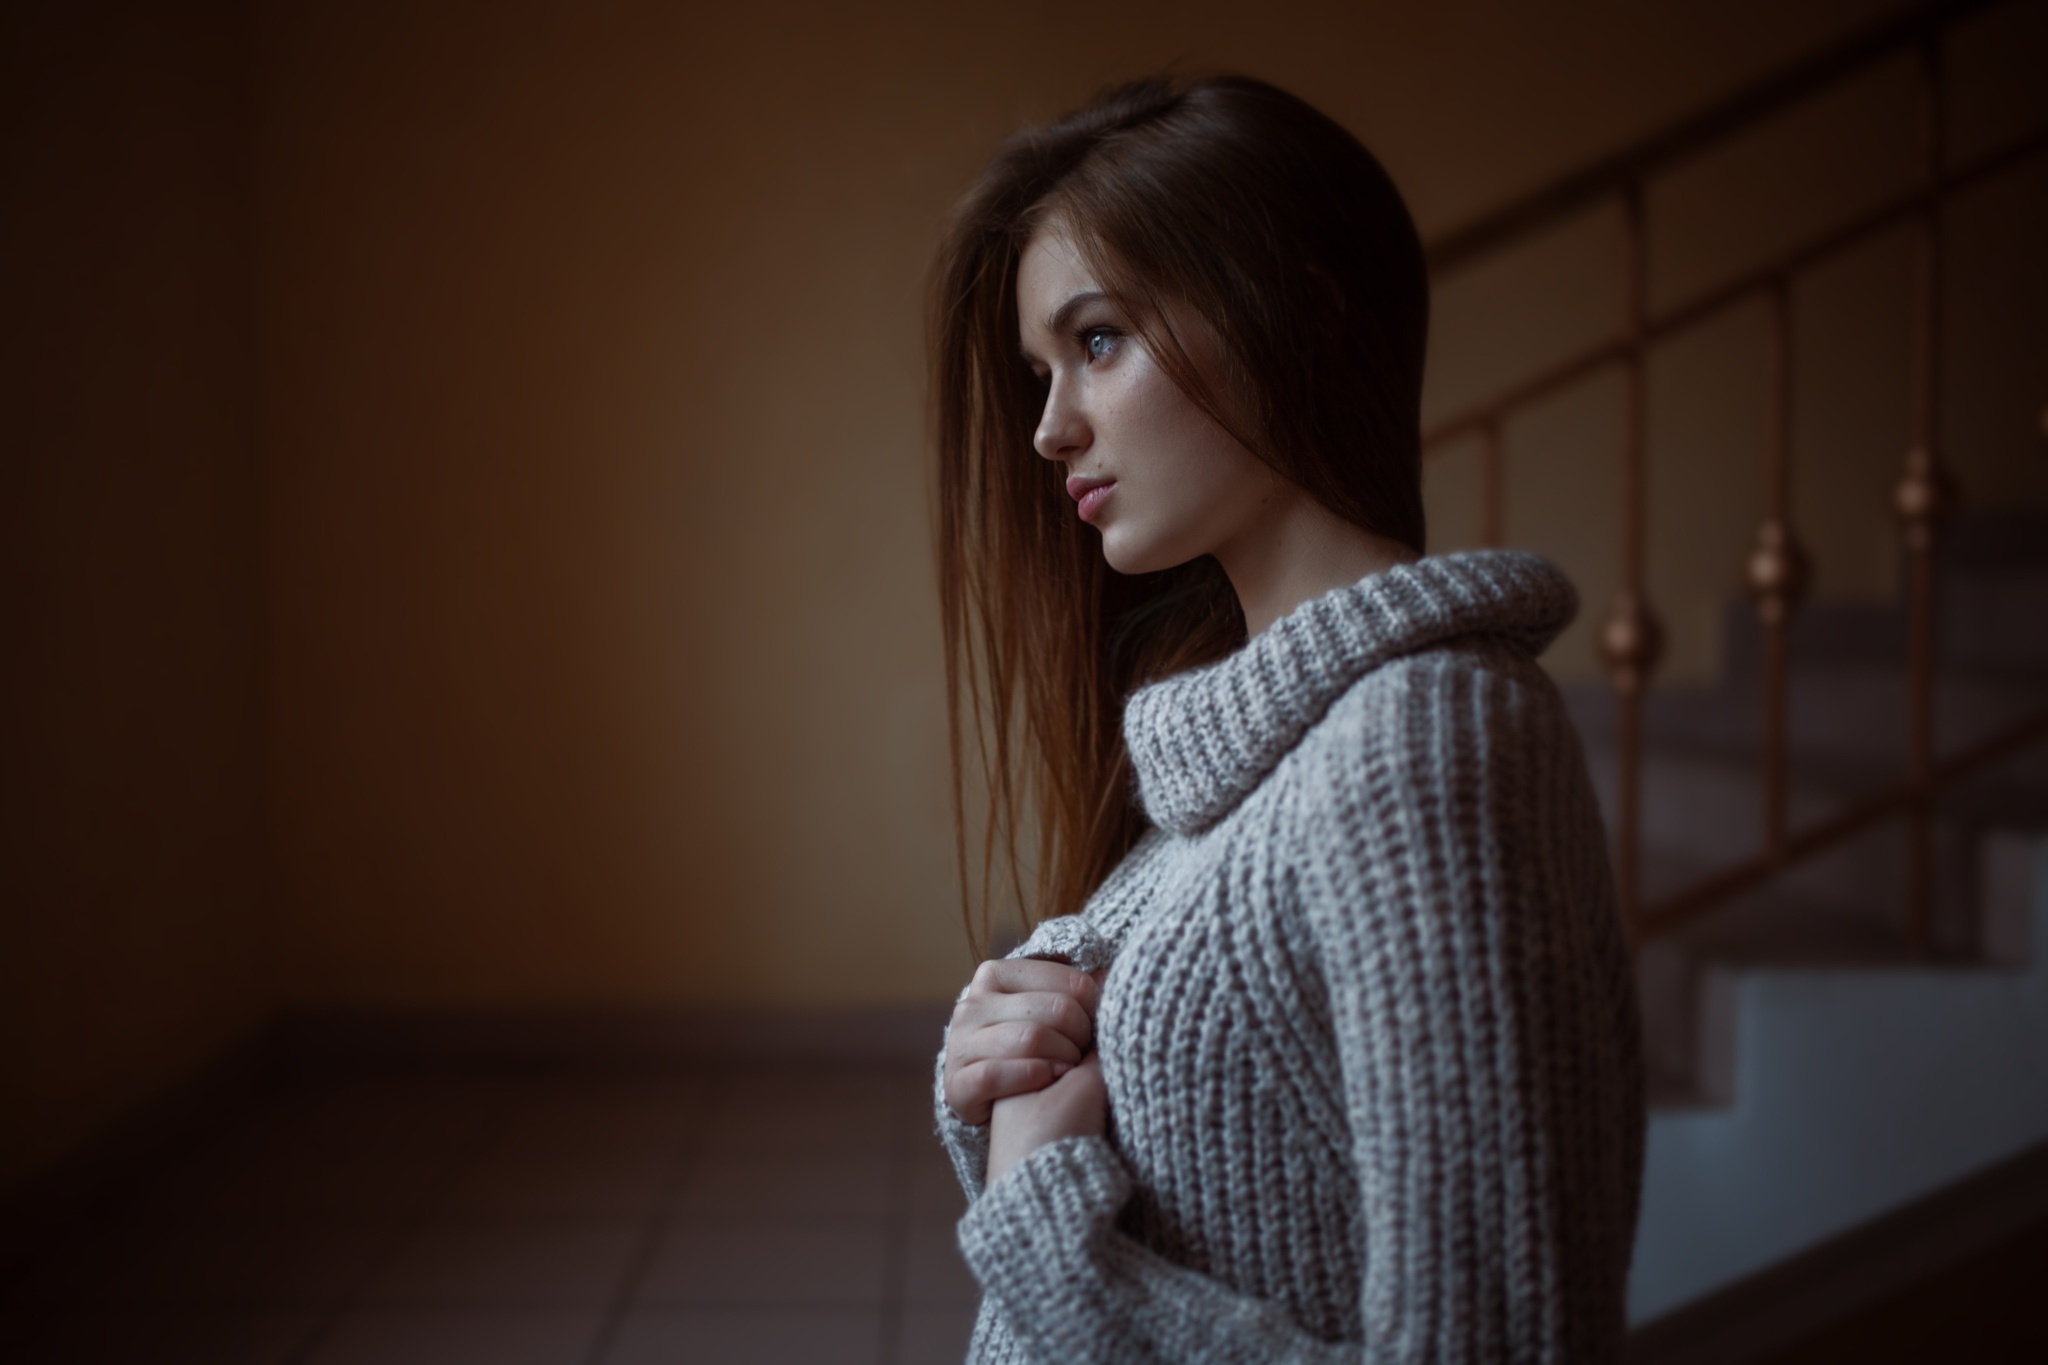 People 2048x1365 model depth of field women sweater white sweater stairs side view profile brunette long hair straight hair indoors women indoors